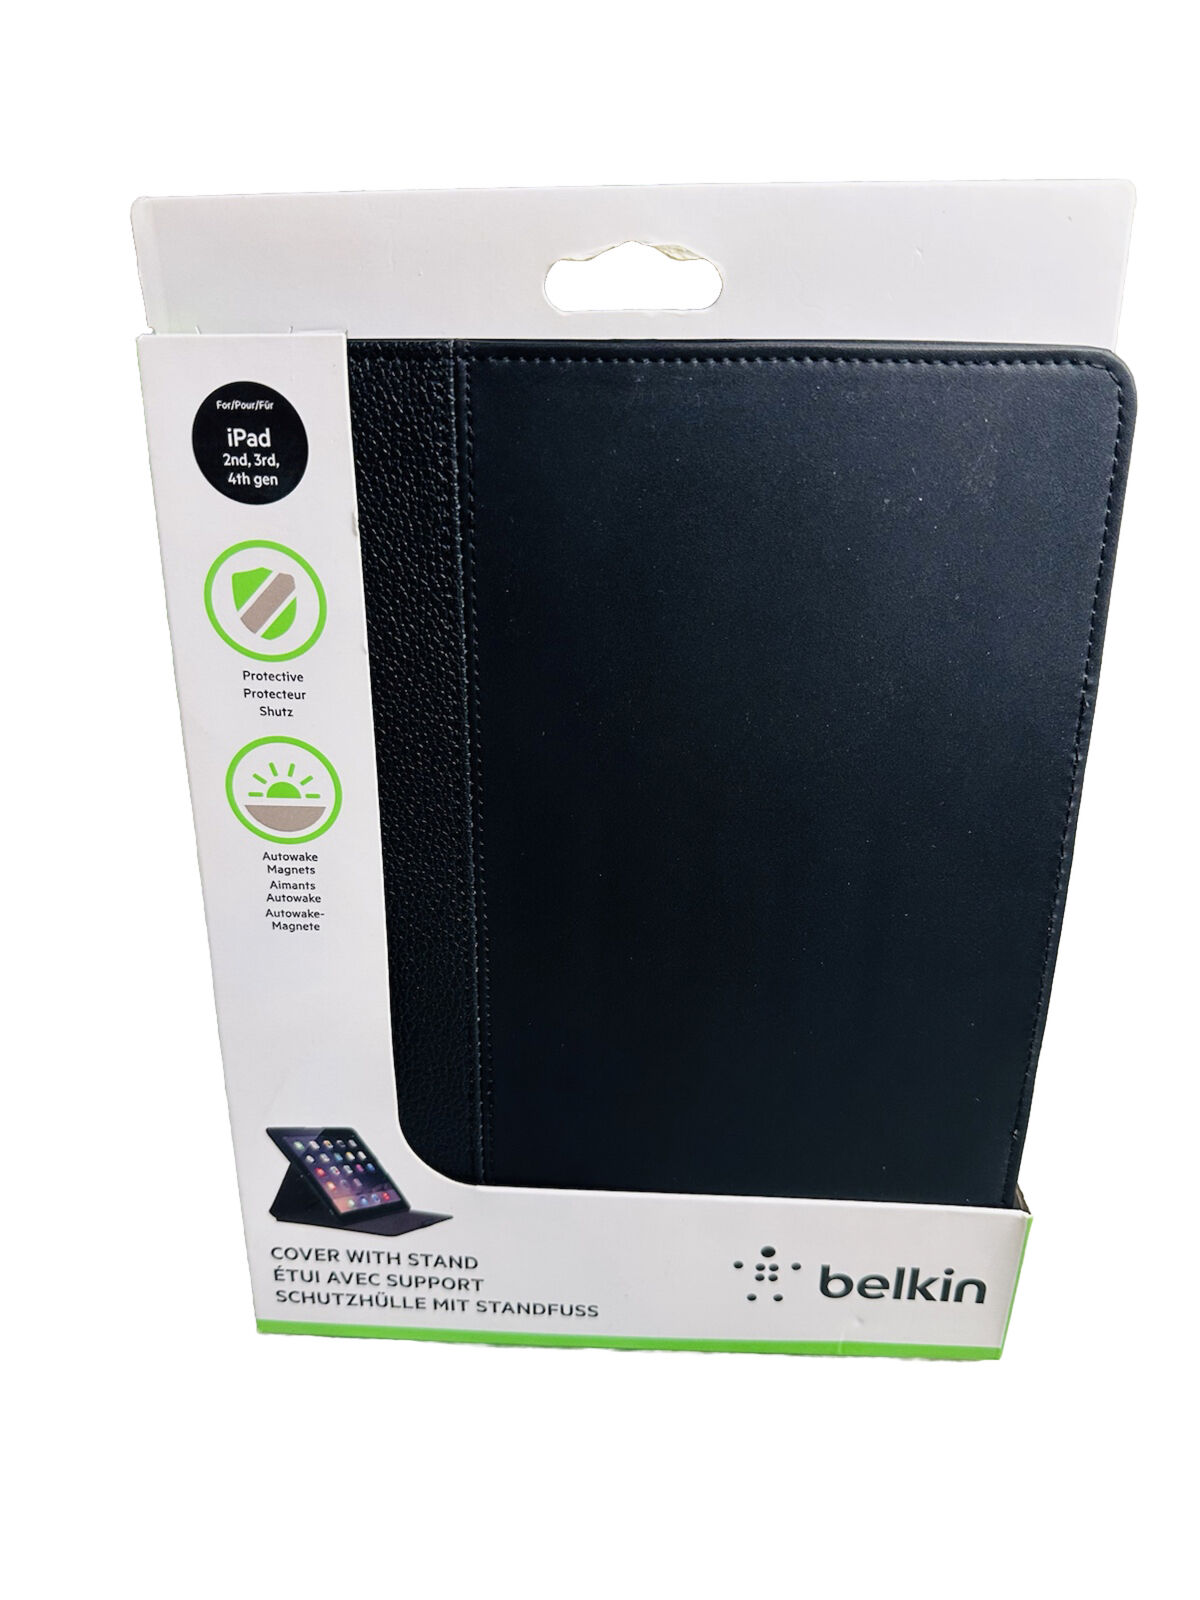 Belkin Mobile Stripe Cover-IPad 2nd/3nd/4th gen. BRAND NEW-SHIP SAME BUS DAY